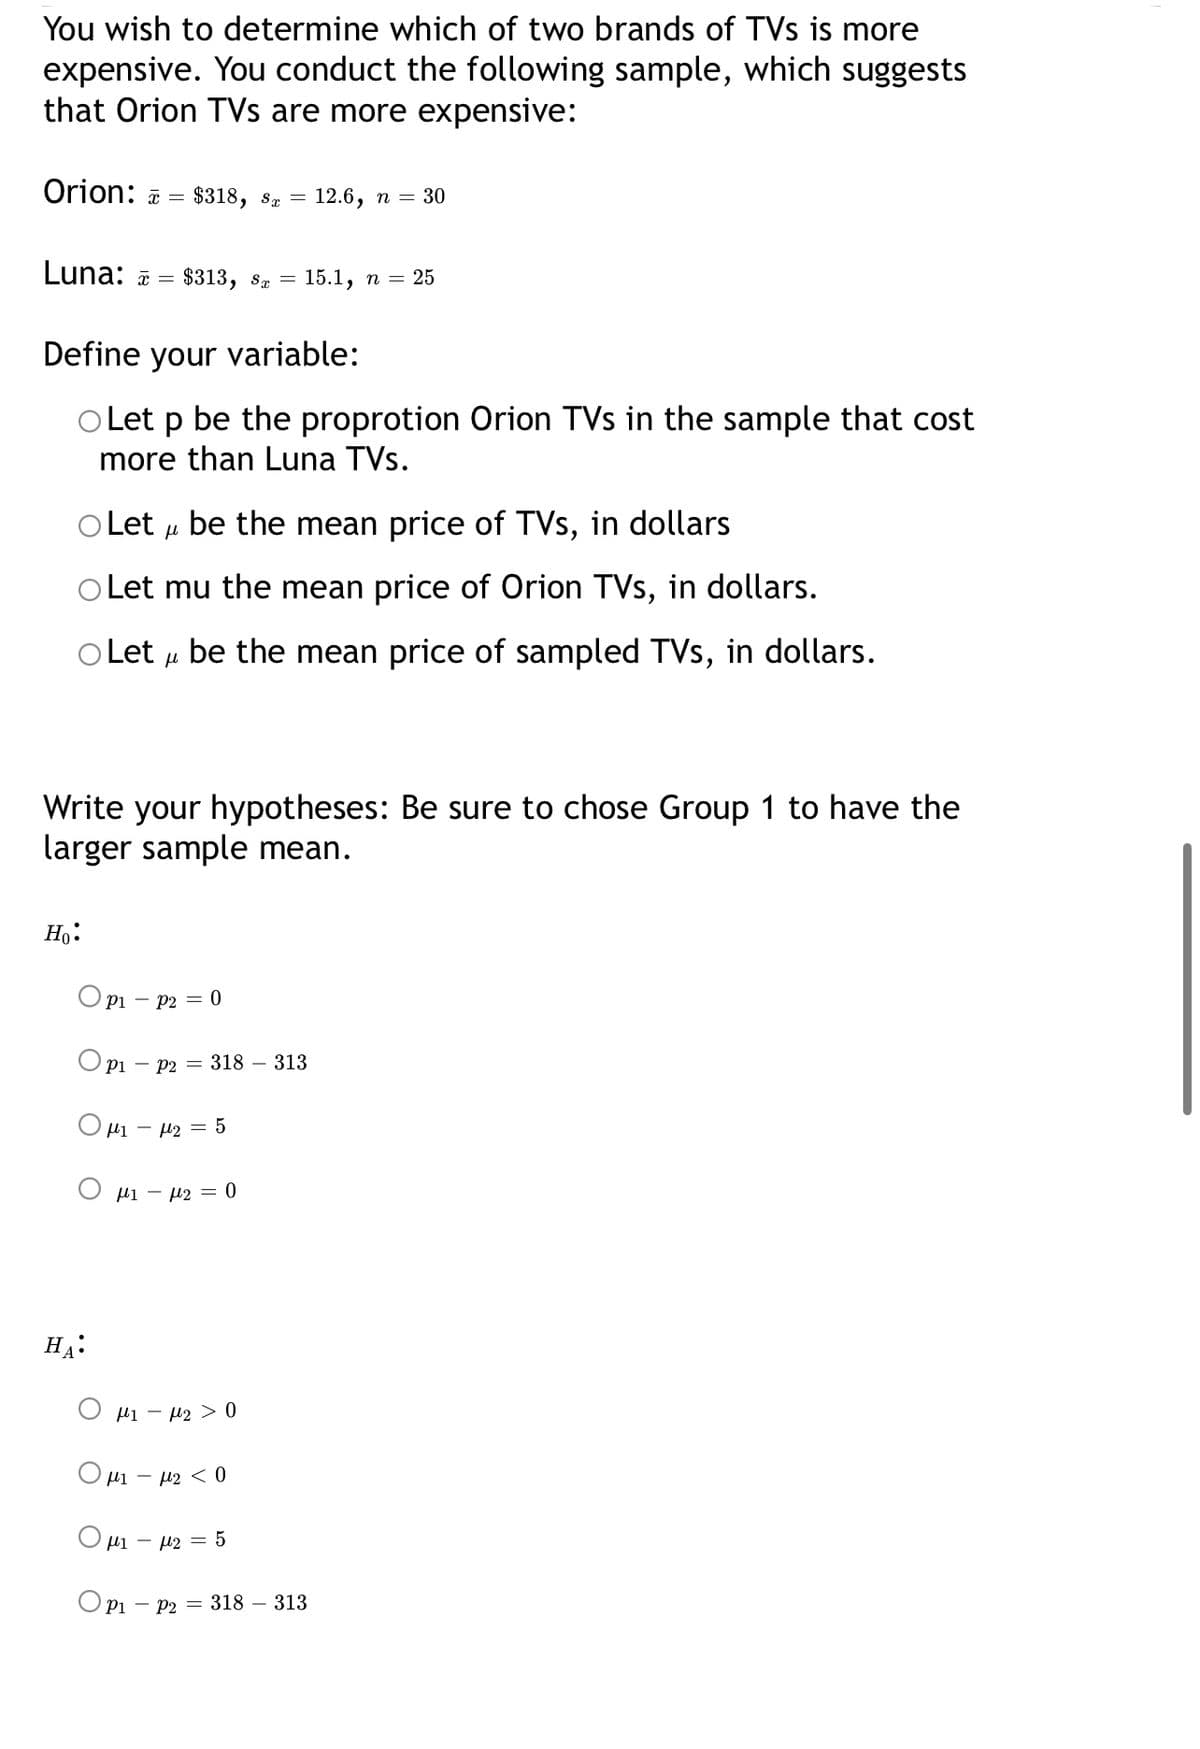 You wish to determine which of two brands of TVs is more
expensive. You conduct the following sample, which suggests
that Orion TVs are more expensive:
Orion: ā = $318, sª =
12.6, п — 30
Luna: ā =
$313, 8z =
15.1, n = 25
Define your variable:
O Let p be the proprotion Orion TVs in the sample that cost
more than Luna TVs.
OLet u be the mean price of TVs, in dollars
Let mu the mean price of Orion TVs, in dollars.
Let u be the mean price of sampled TVs, in dollars.
Write your hypotheses: Be sure to chose Group 1 to have the
larger sample mean.
Но:
Opi – P2 = 0
O pi – P2 = 318 – 313
Ο μ-μ 5
µi - µ2 = 0
HA:
Hi – µ2 > 0
O ui – u2 < 0
µi – µ2 = 5
Opi -
- P2 = 318 – 313
